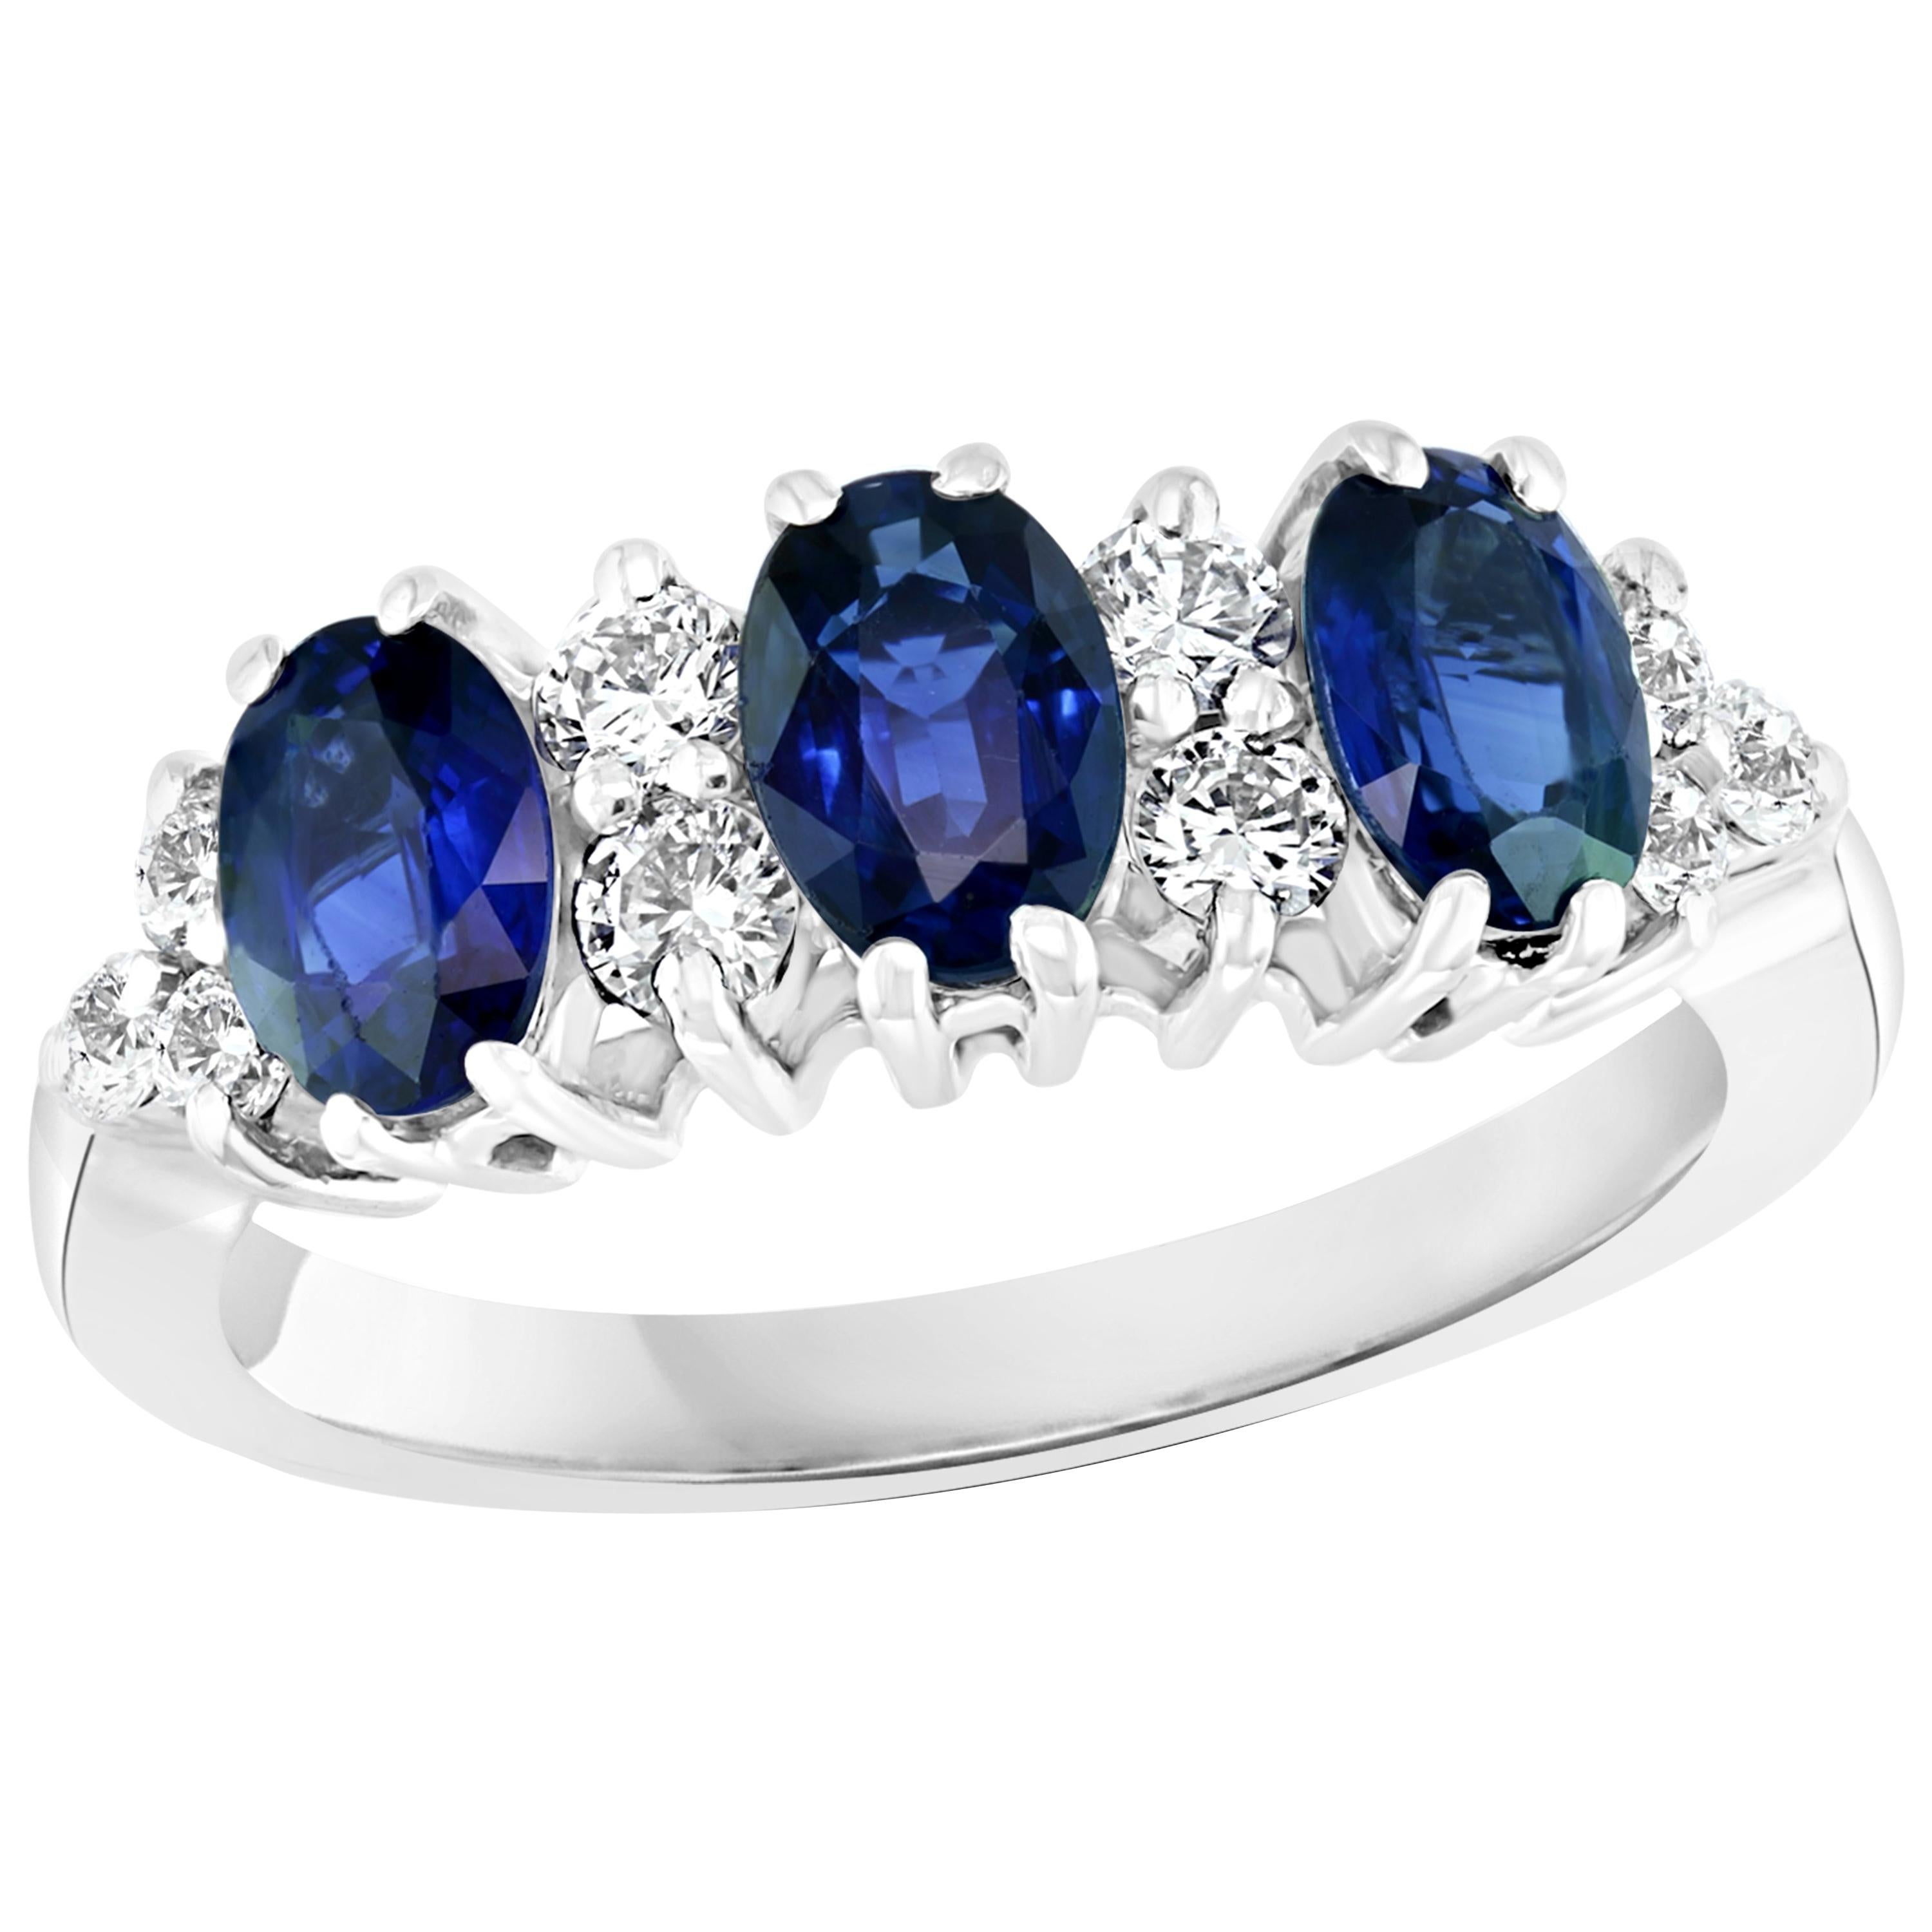 2.5ct Blue Sapphire & 0.6ct Diamond Cocktail Ring in 18 Karat White Gold Estate For Sale